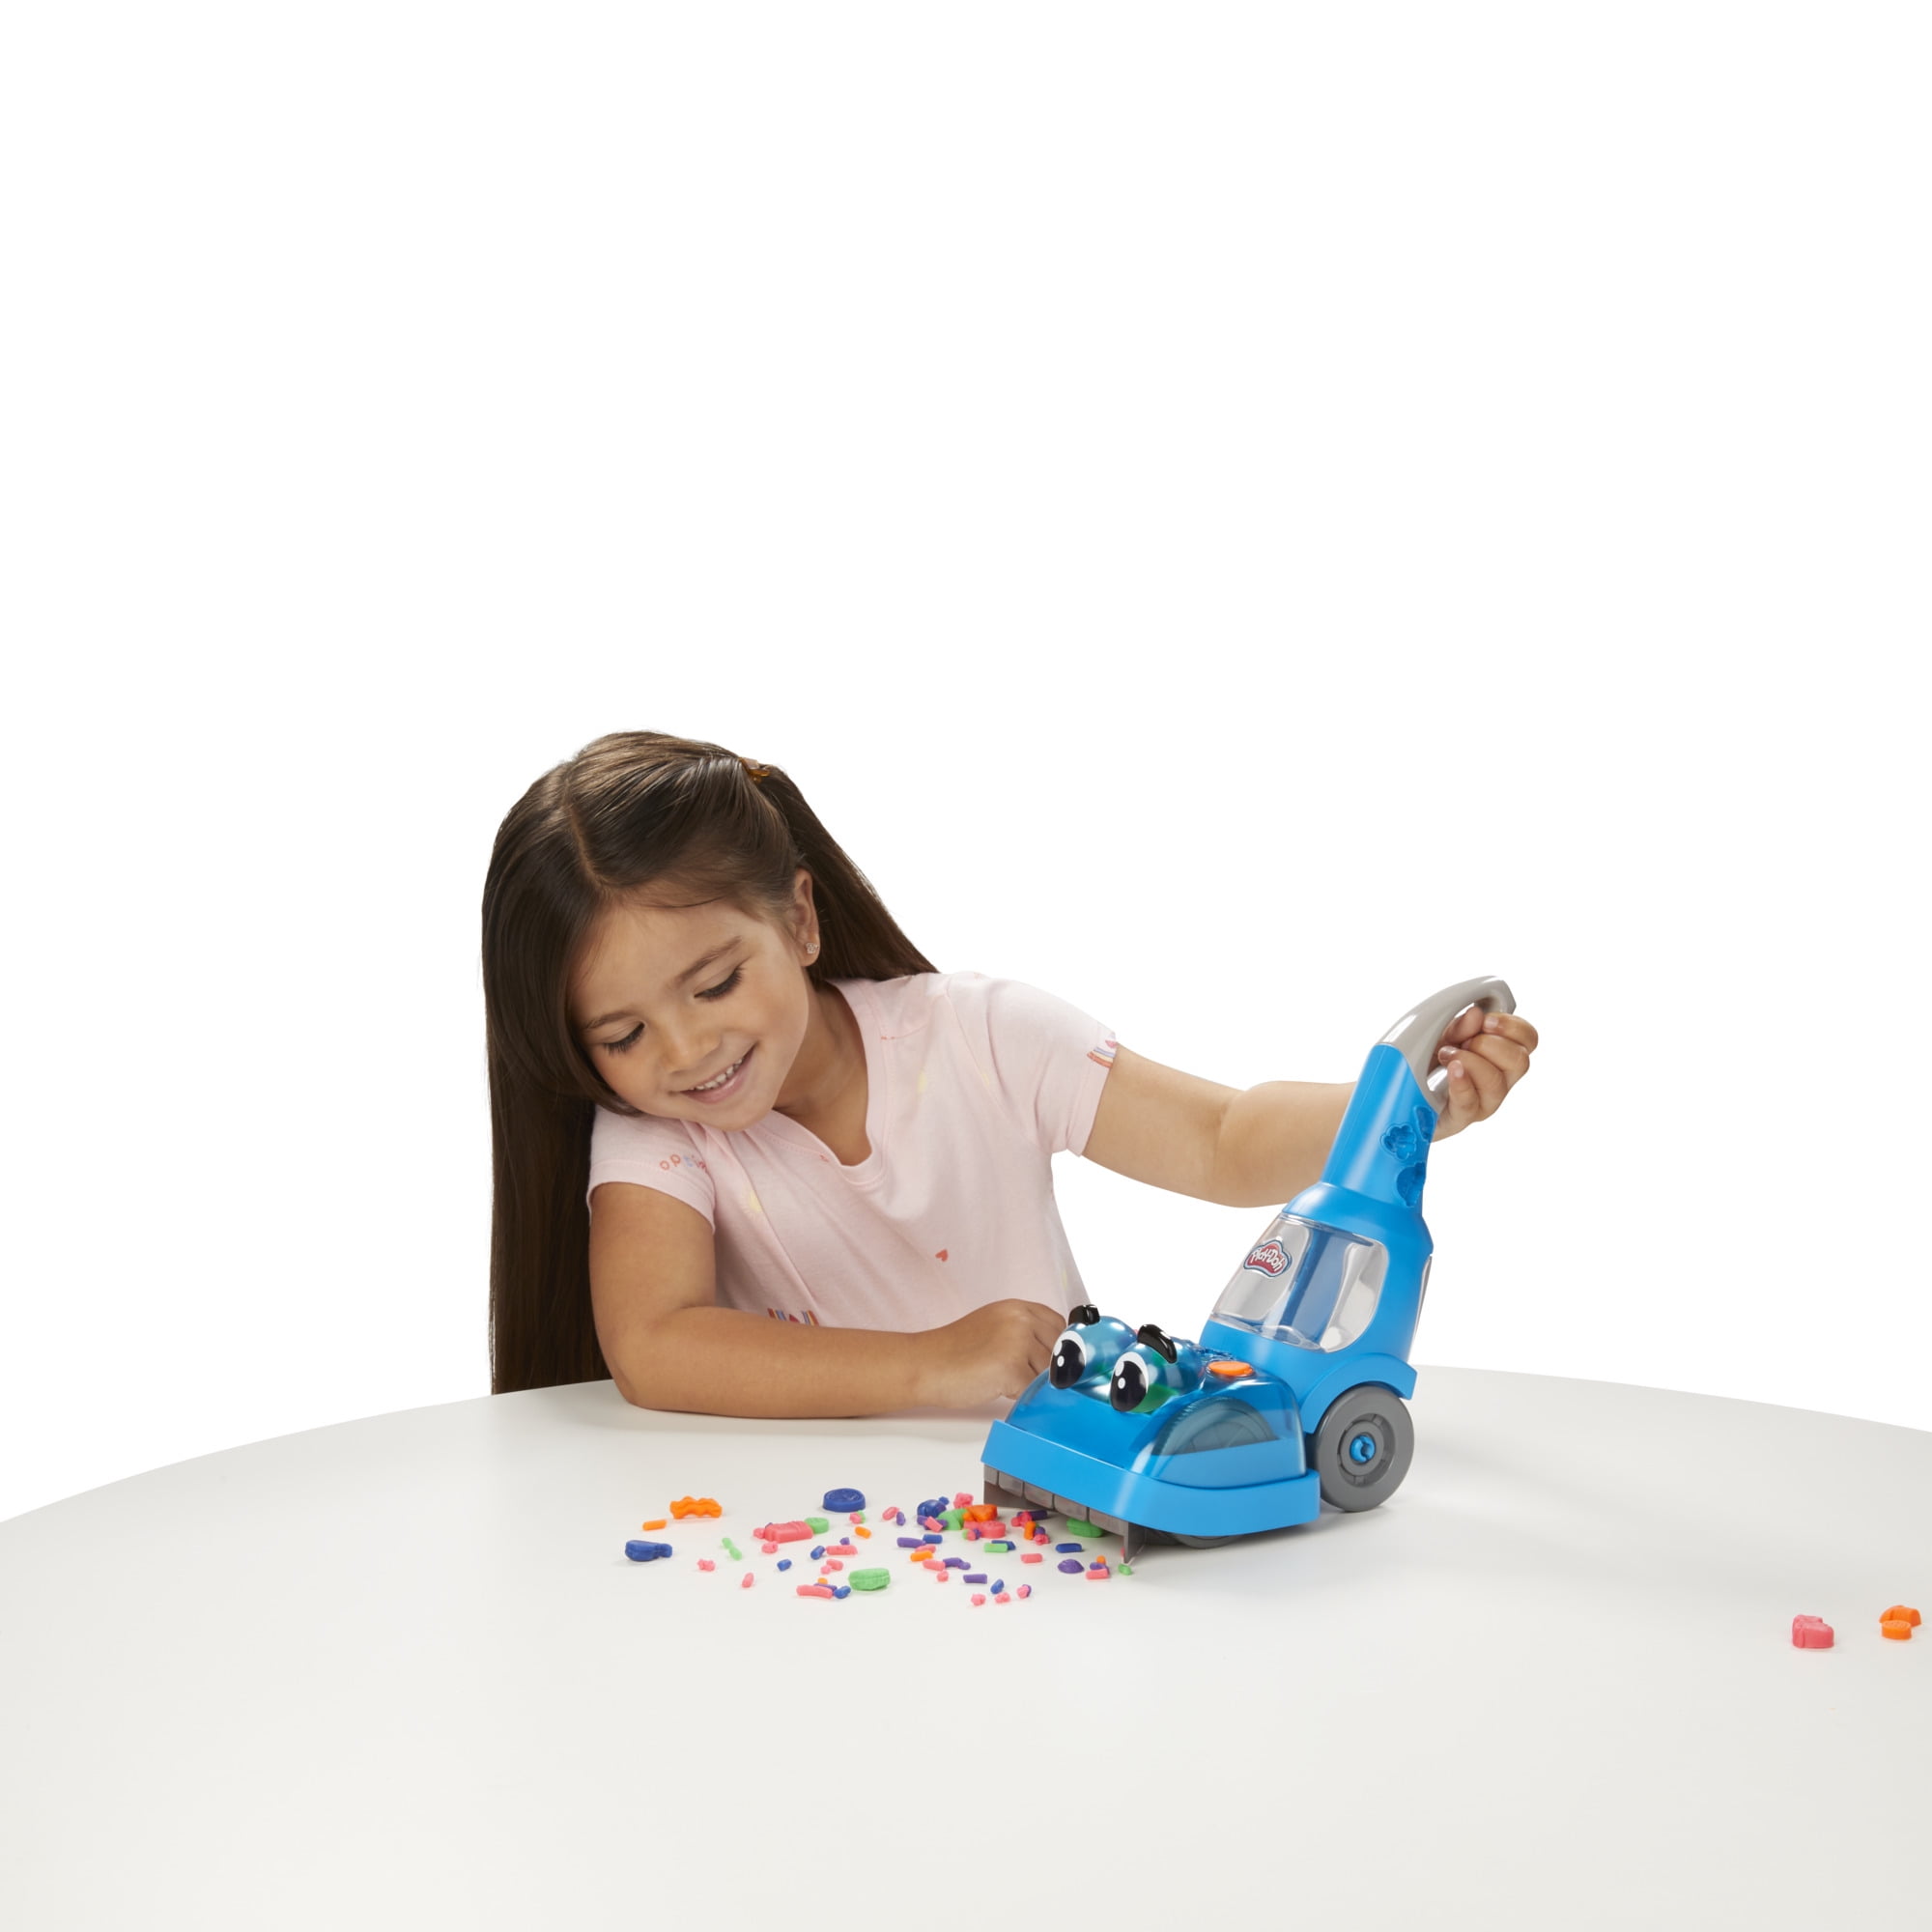 Play-Doh Zoom Zoom Vacuum and Cleanup Set